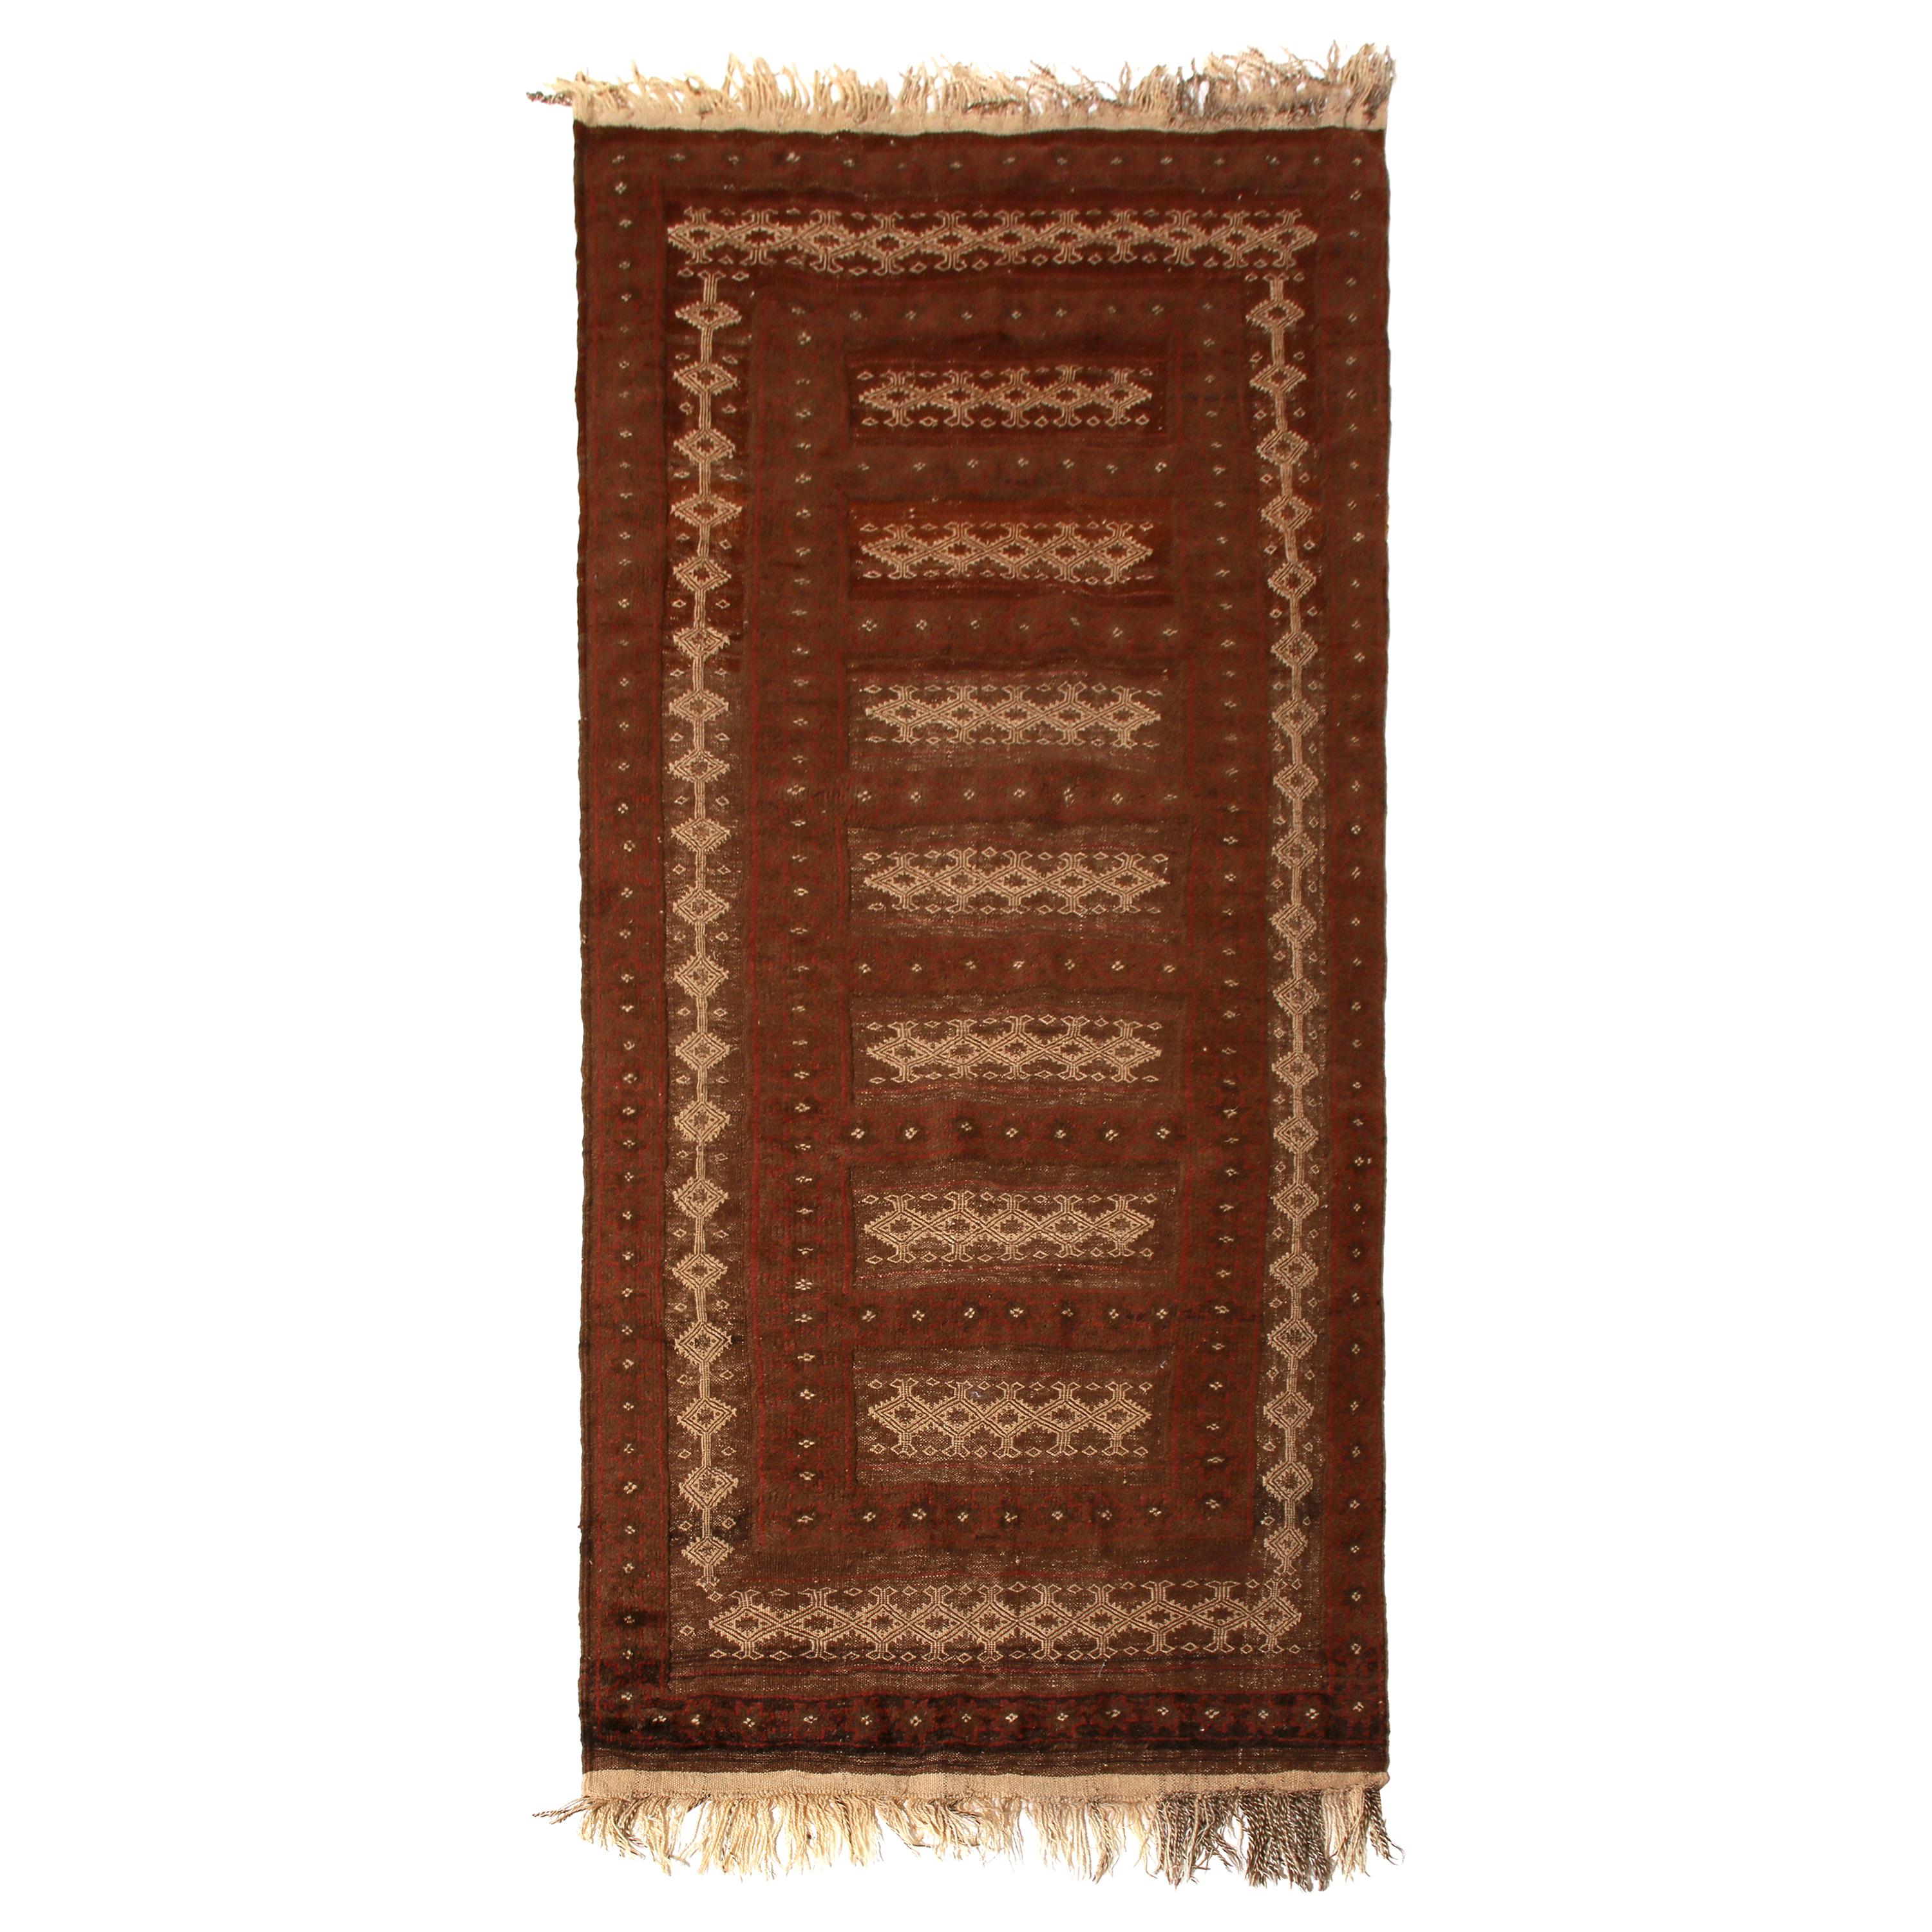 Handwoven Vintage Kilim Brown Beige and Red Traditional Flat-Weave